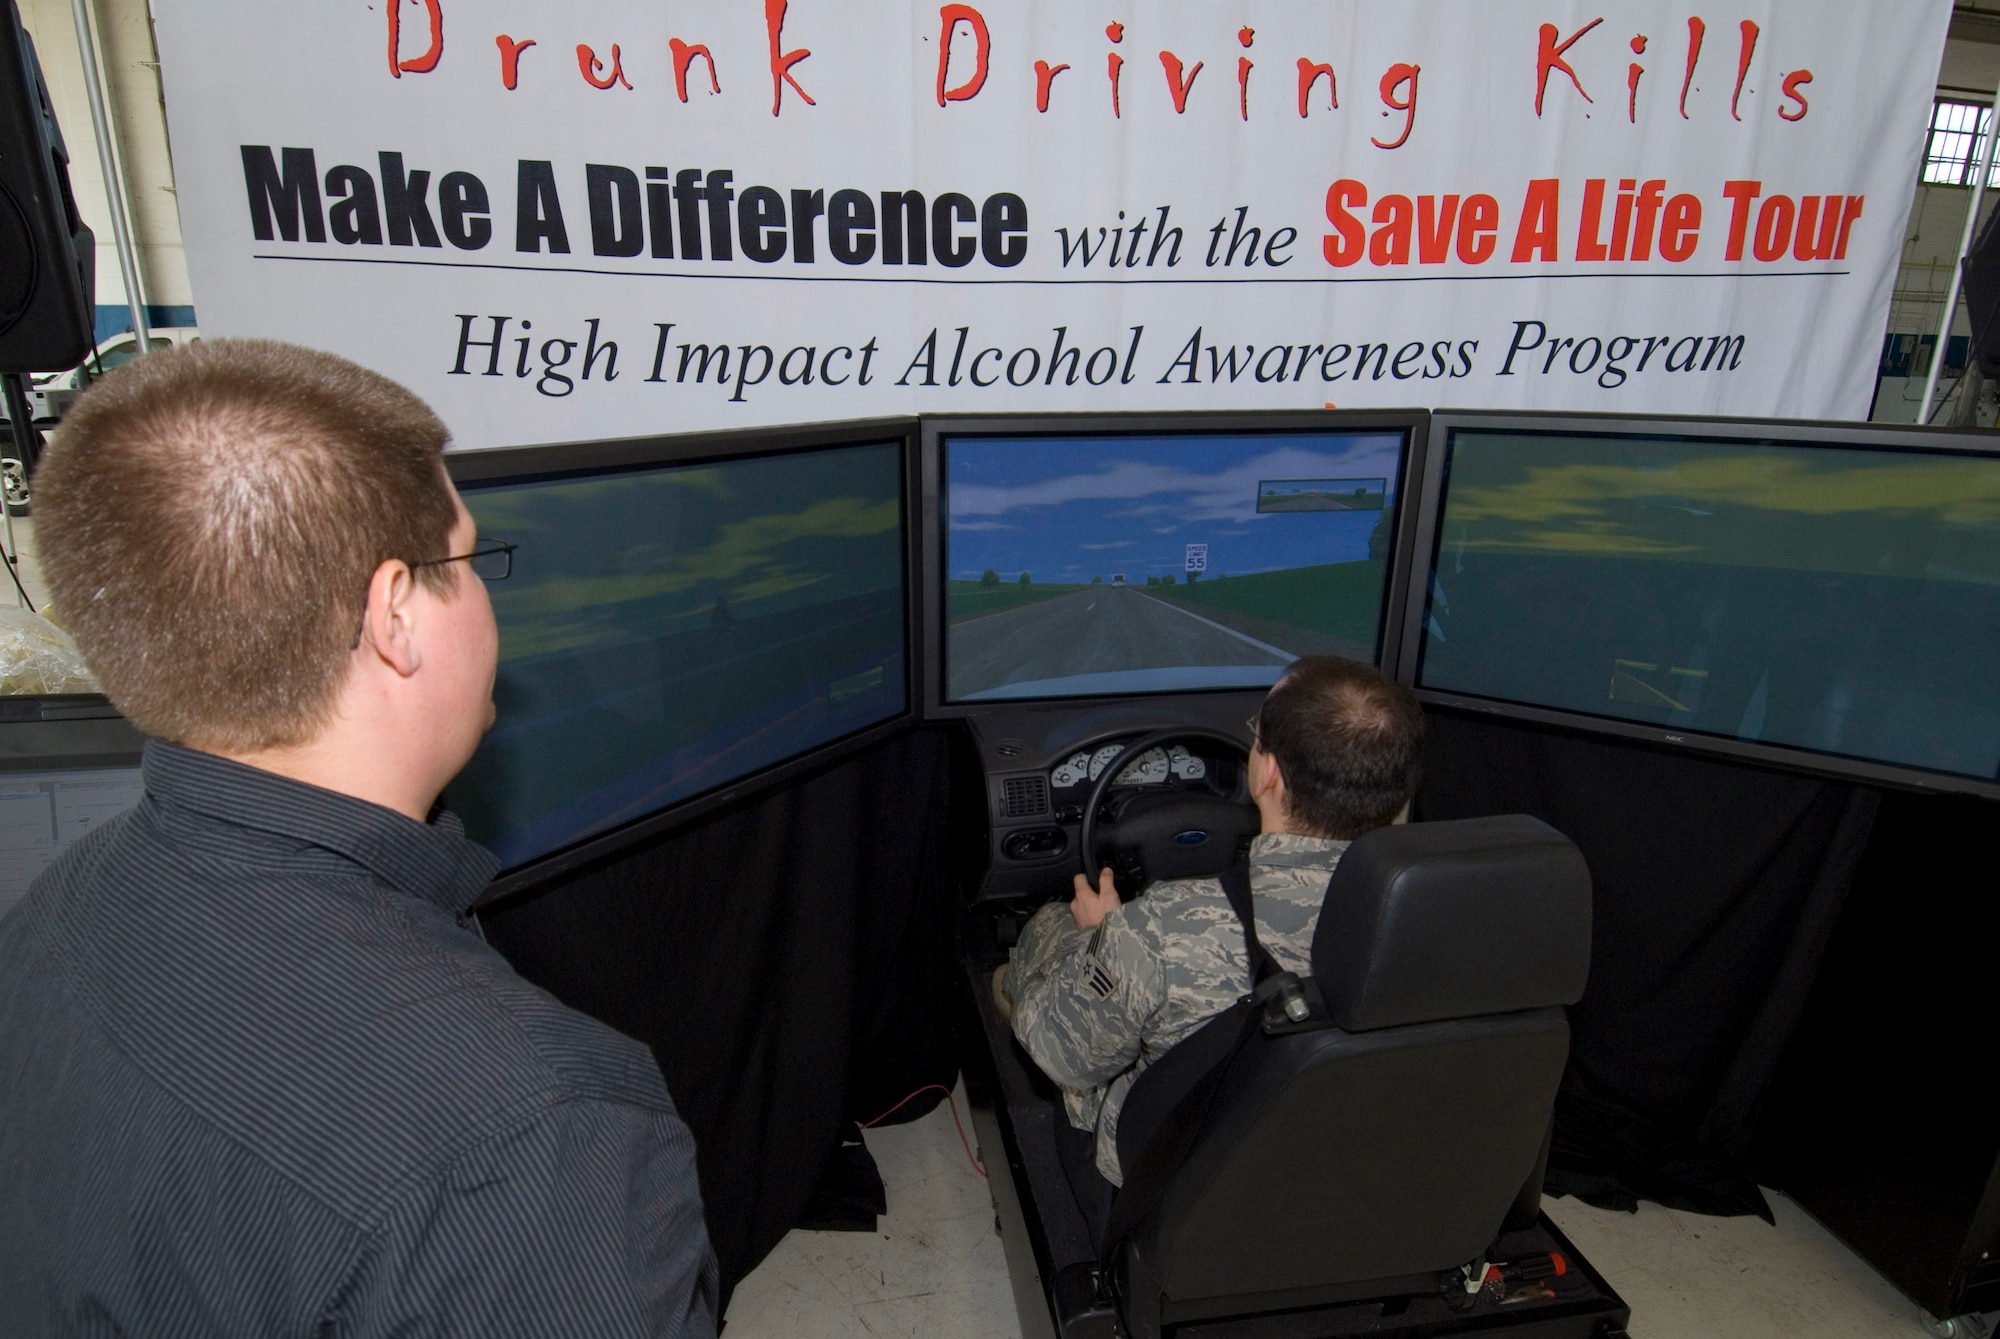 With the guidance of Jordan Brinks, Save A Life Tour simulator instructor, Staff Sgt. Jonathan Early attempts to navigate a driving scenario as if he’s under the influence of alcohol Thursday. The Save a Life Tour began when Mr. Brinks, along with his team, began touring military installations to educate Airmen on the effects of alcohol. (Air Force photo by Jamie Pitcher)